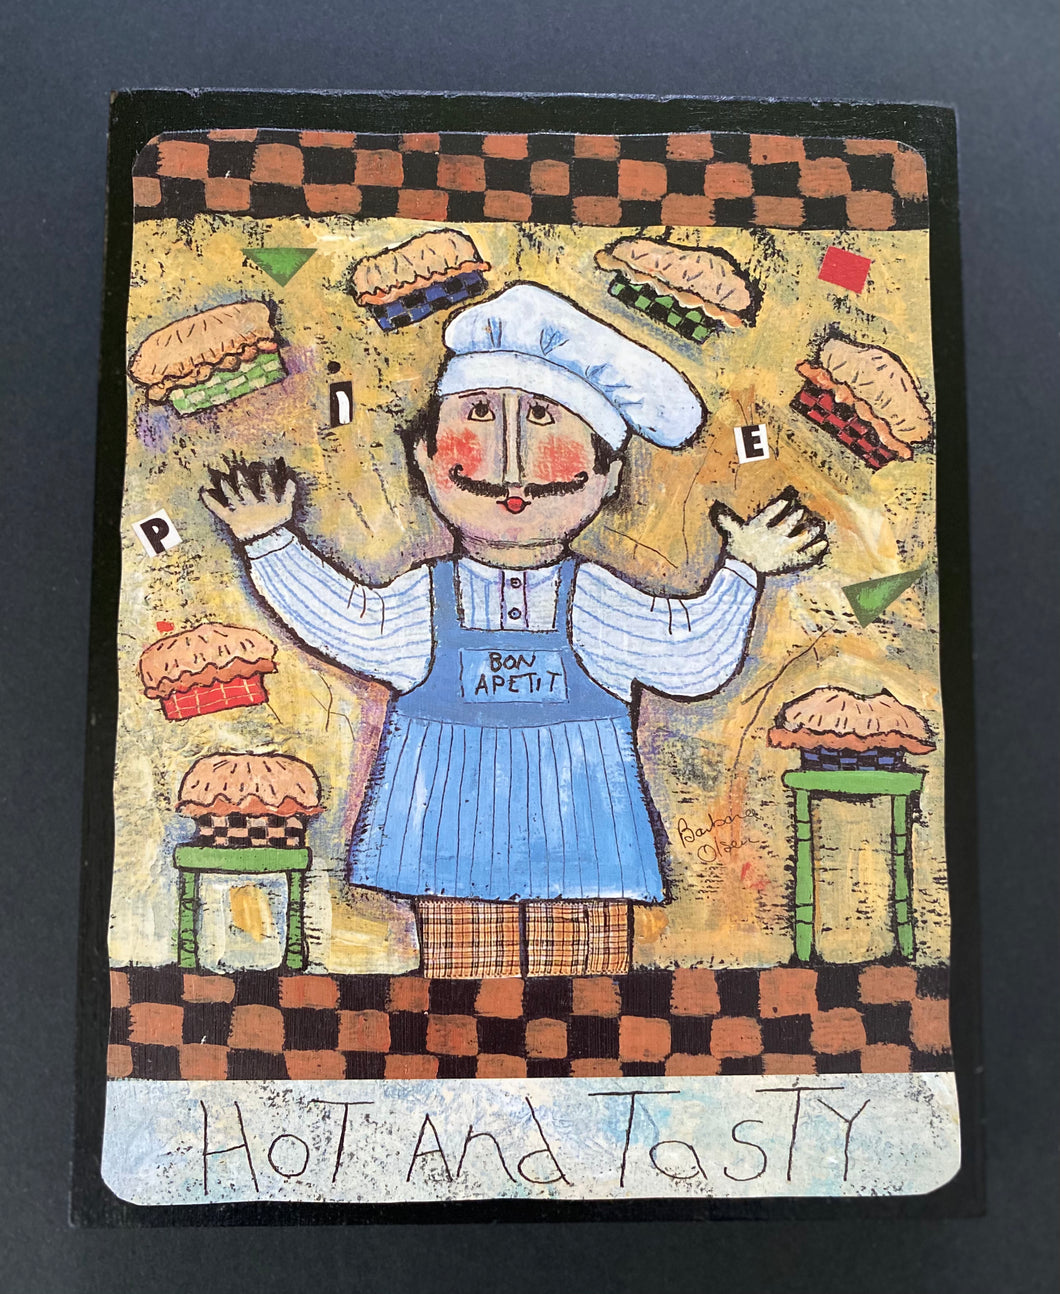 Hot and Tasty - Print on Wood 9